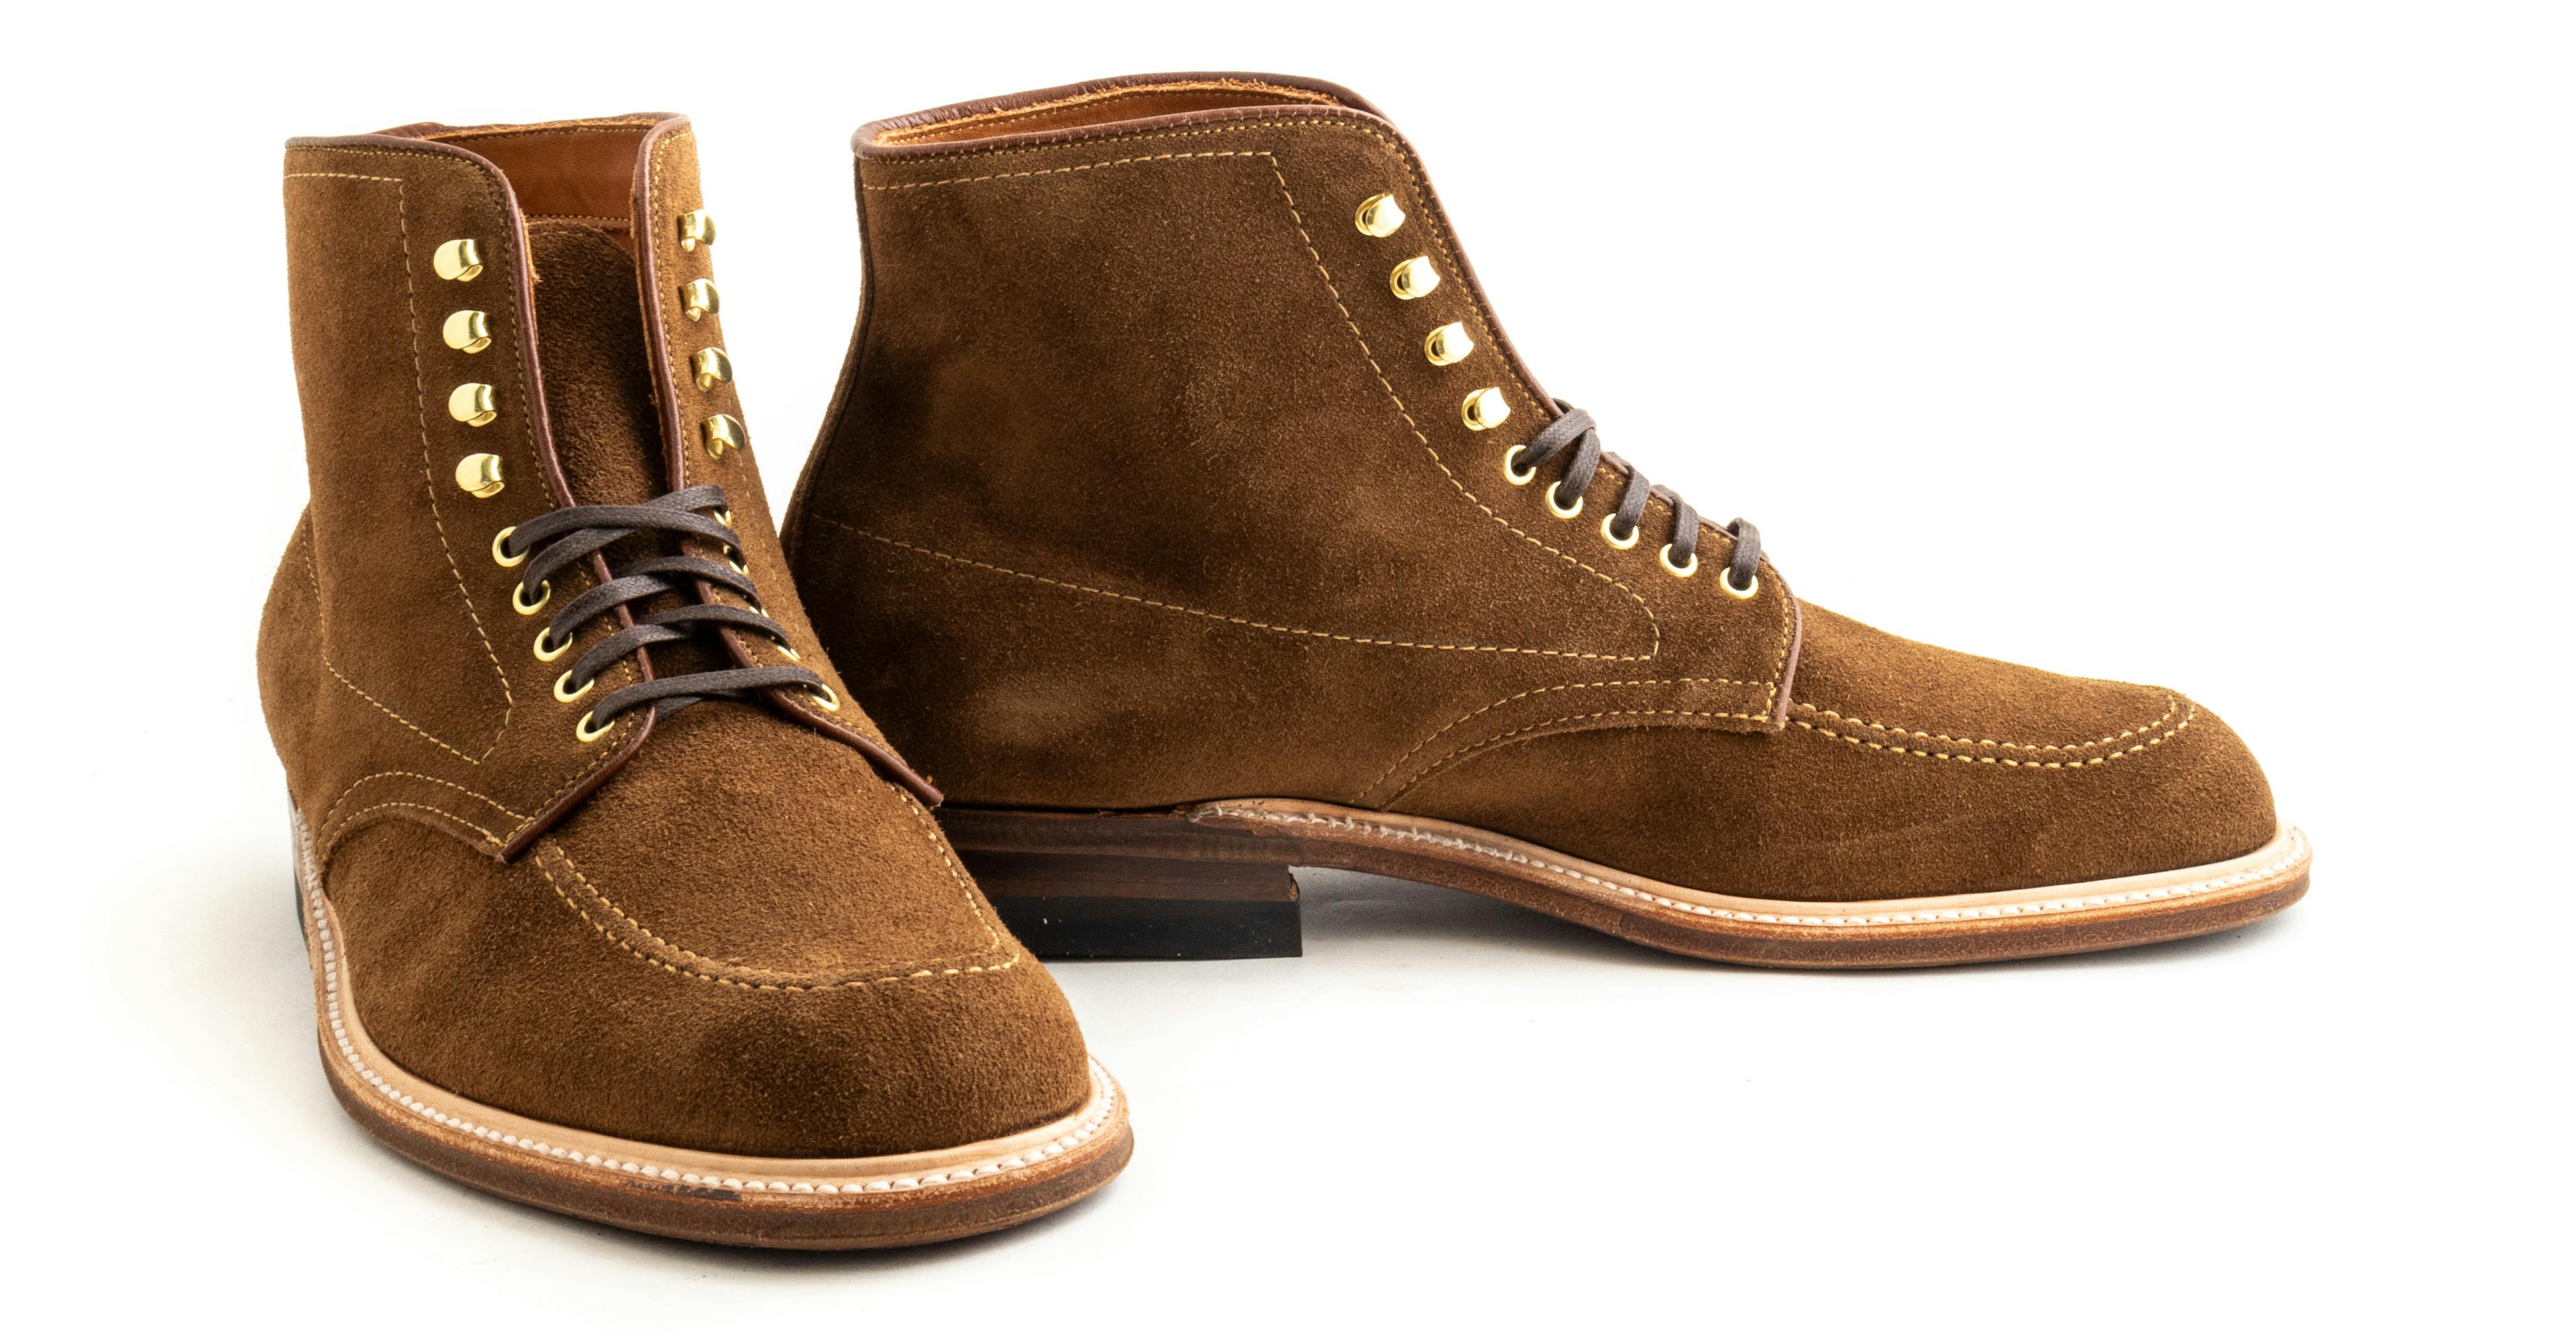 Alden Indy Boot – Snuff